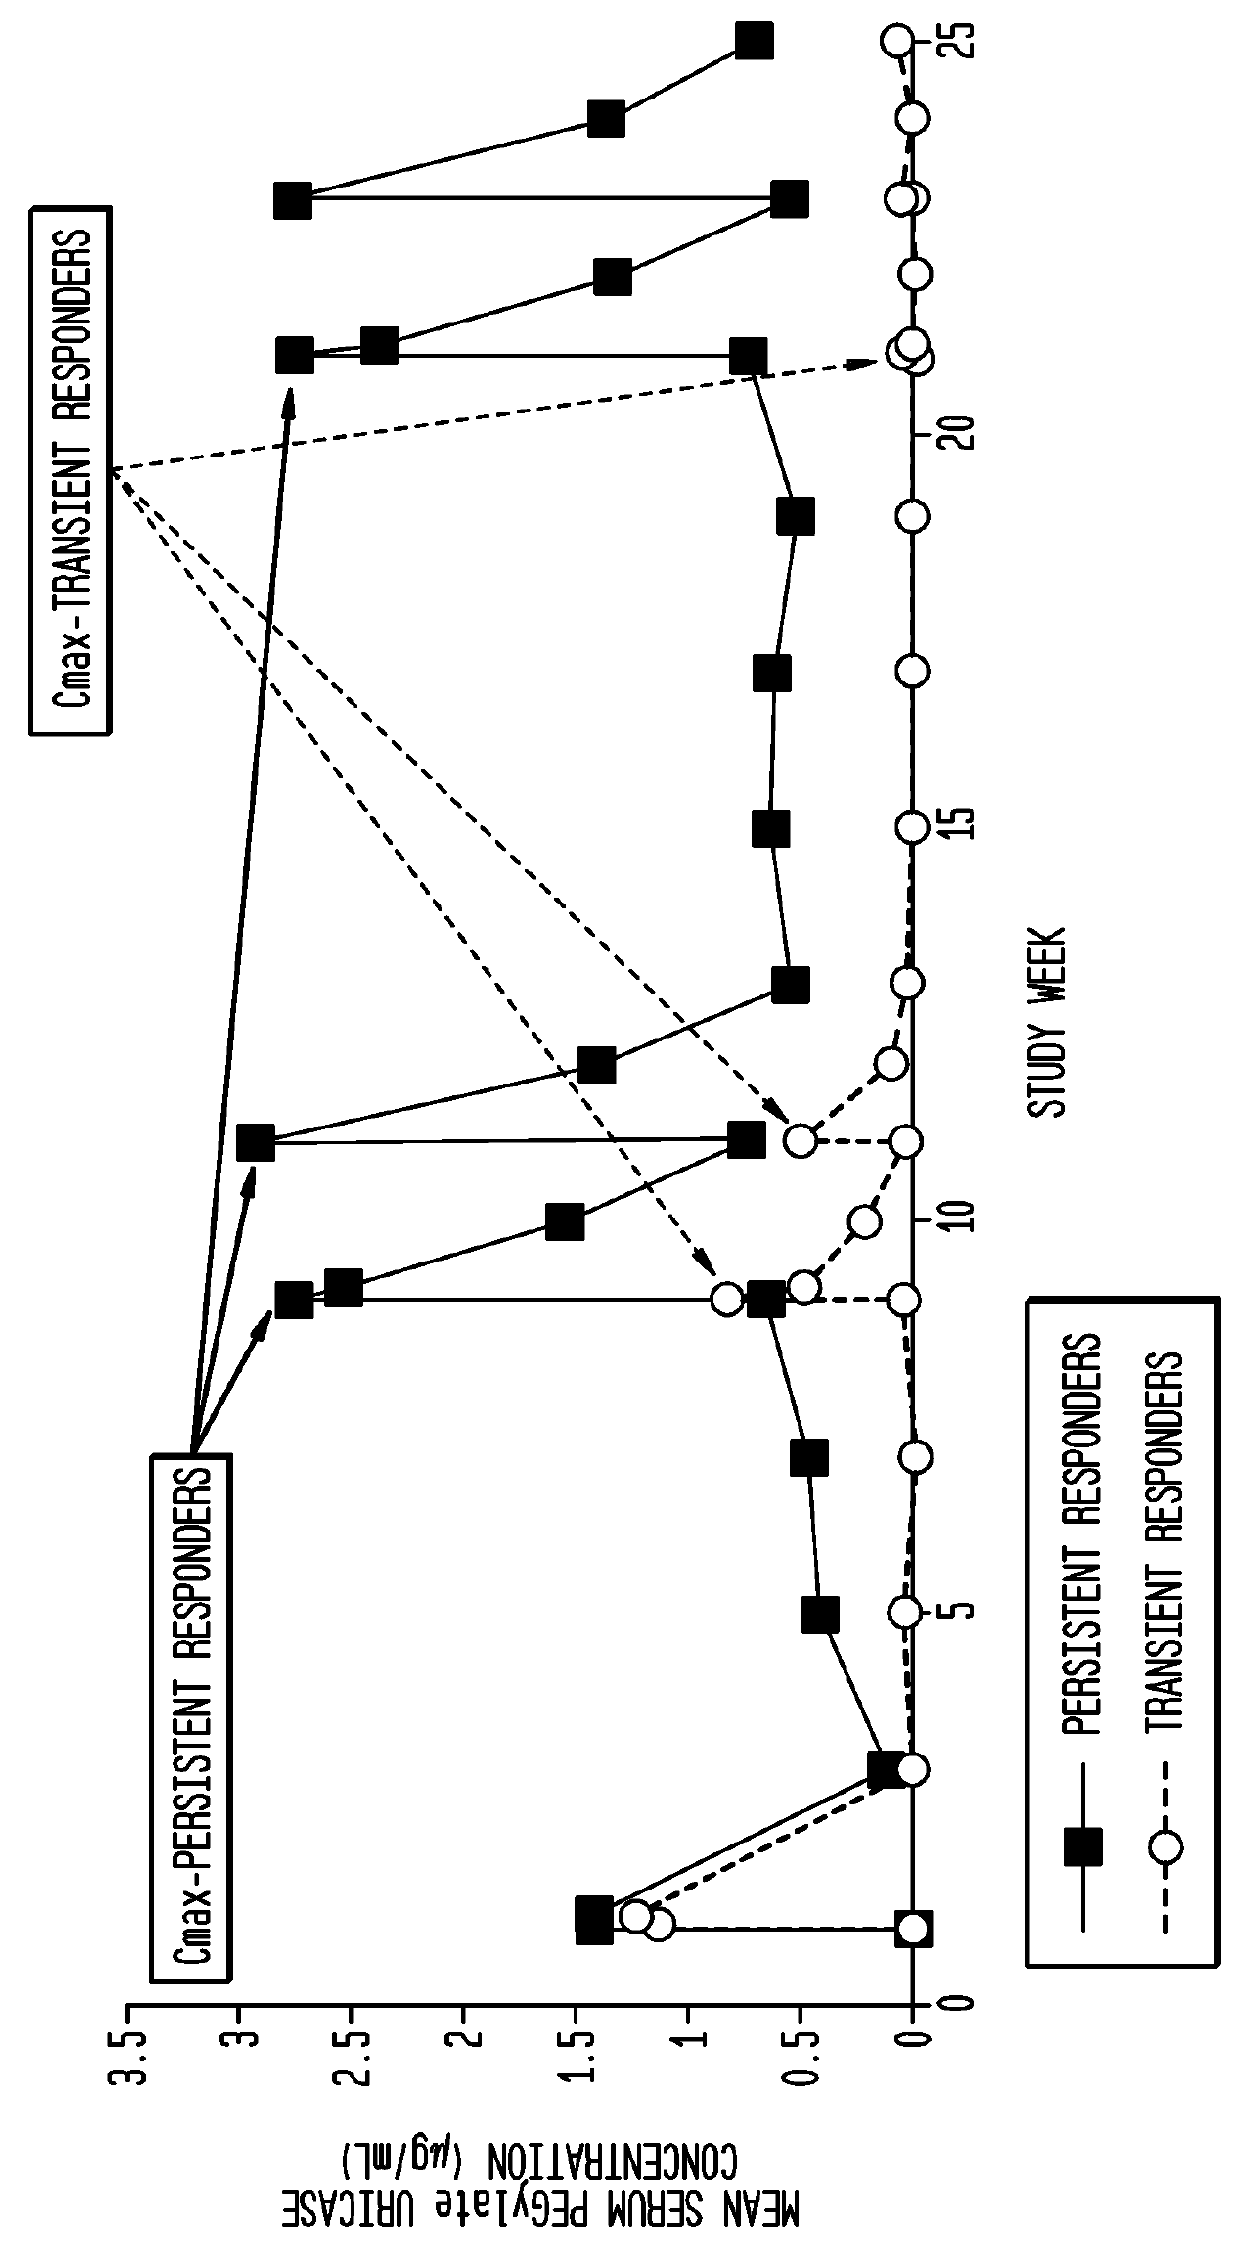 Methods and kits for predicting infusion reaction risk and antibody-mediated loss of response by monitoring serum uric acid during pegylated uricase therapy